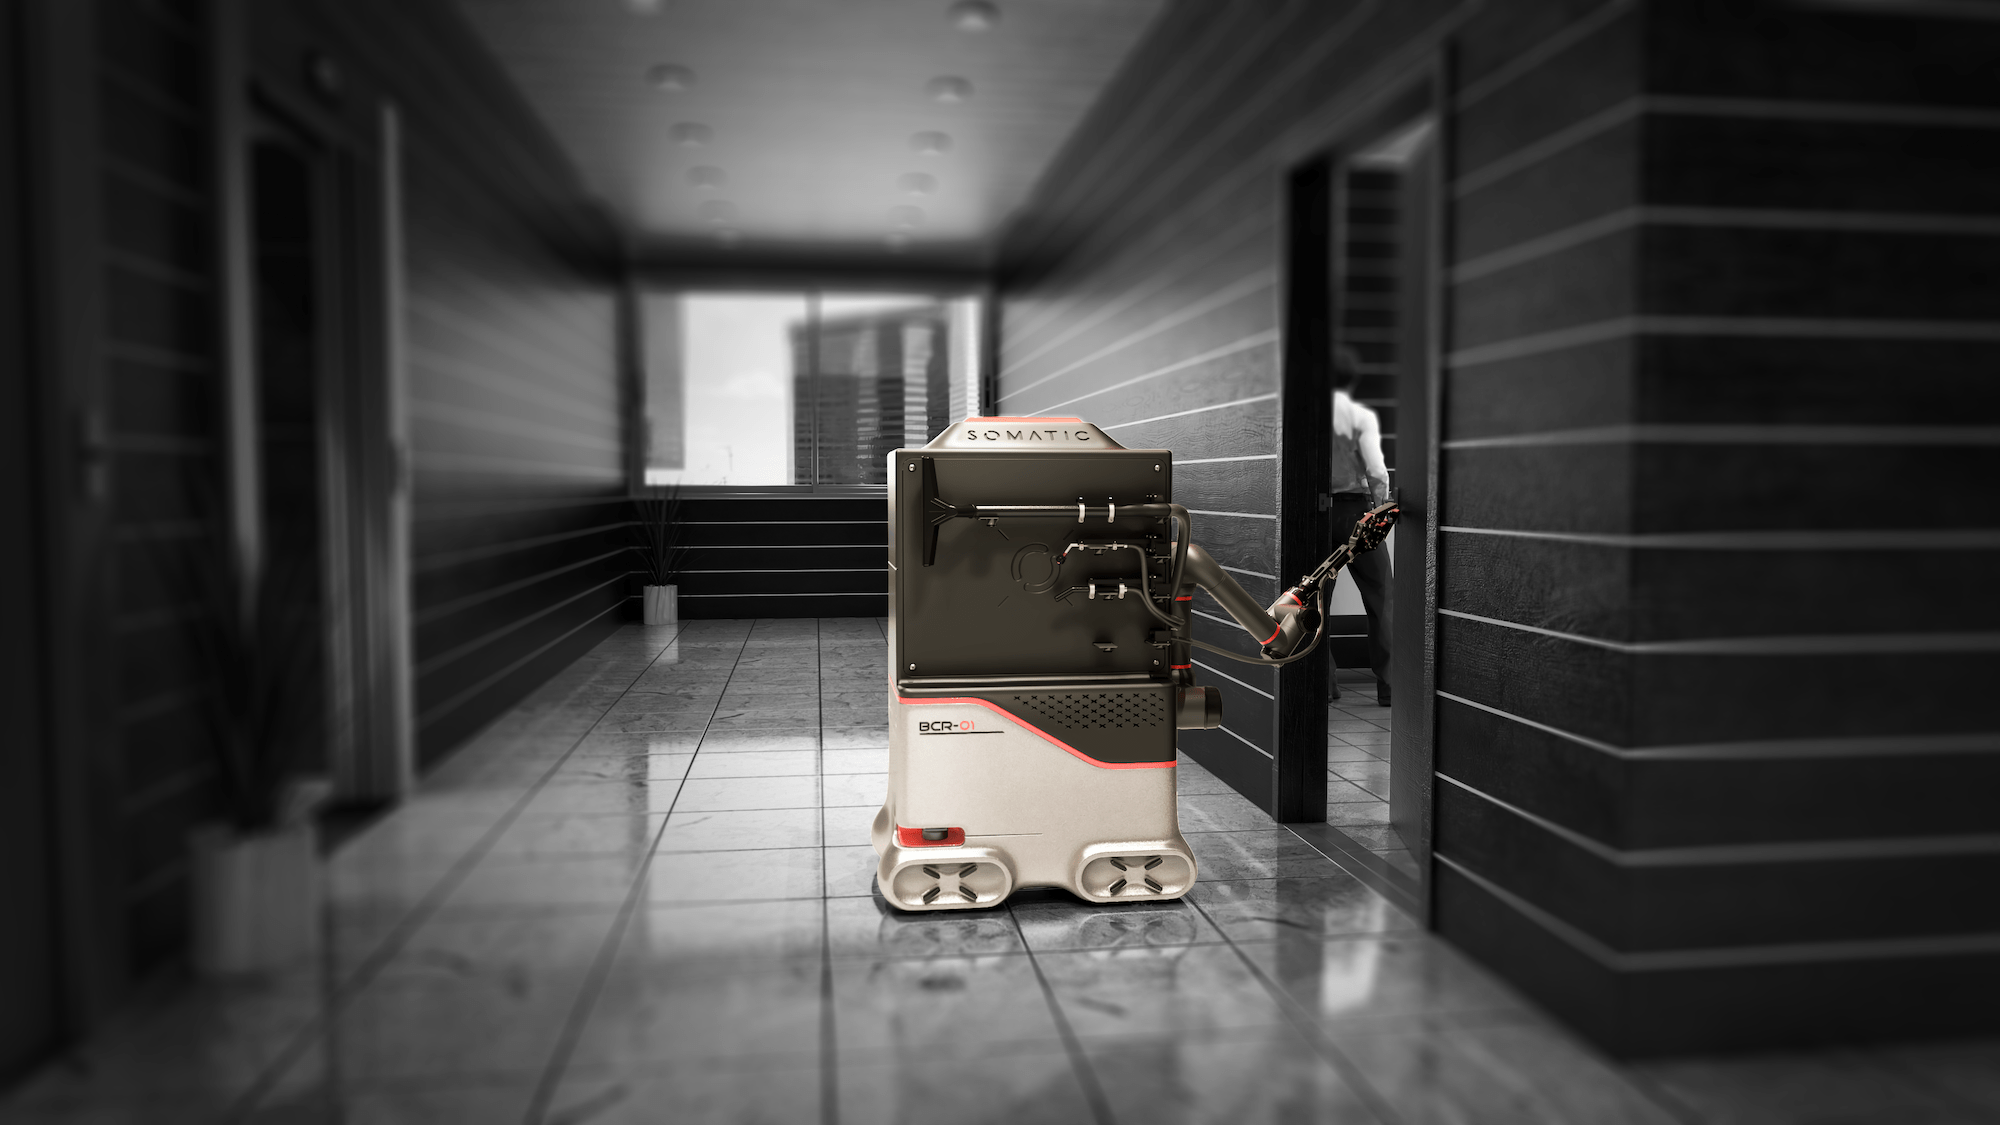 These bathroom-cleaning bots won’t replace human janitors any time soon